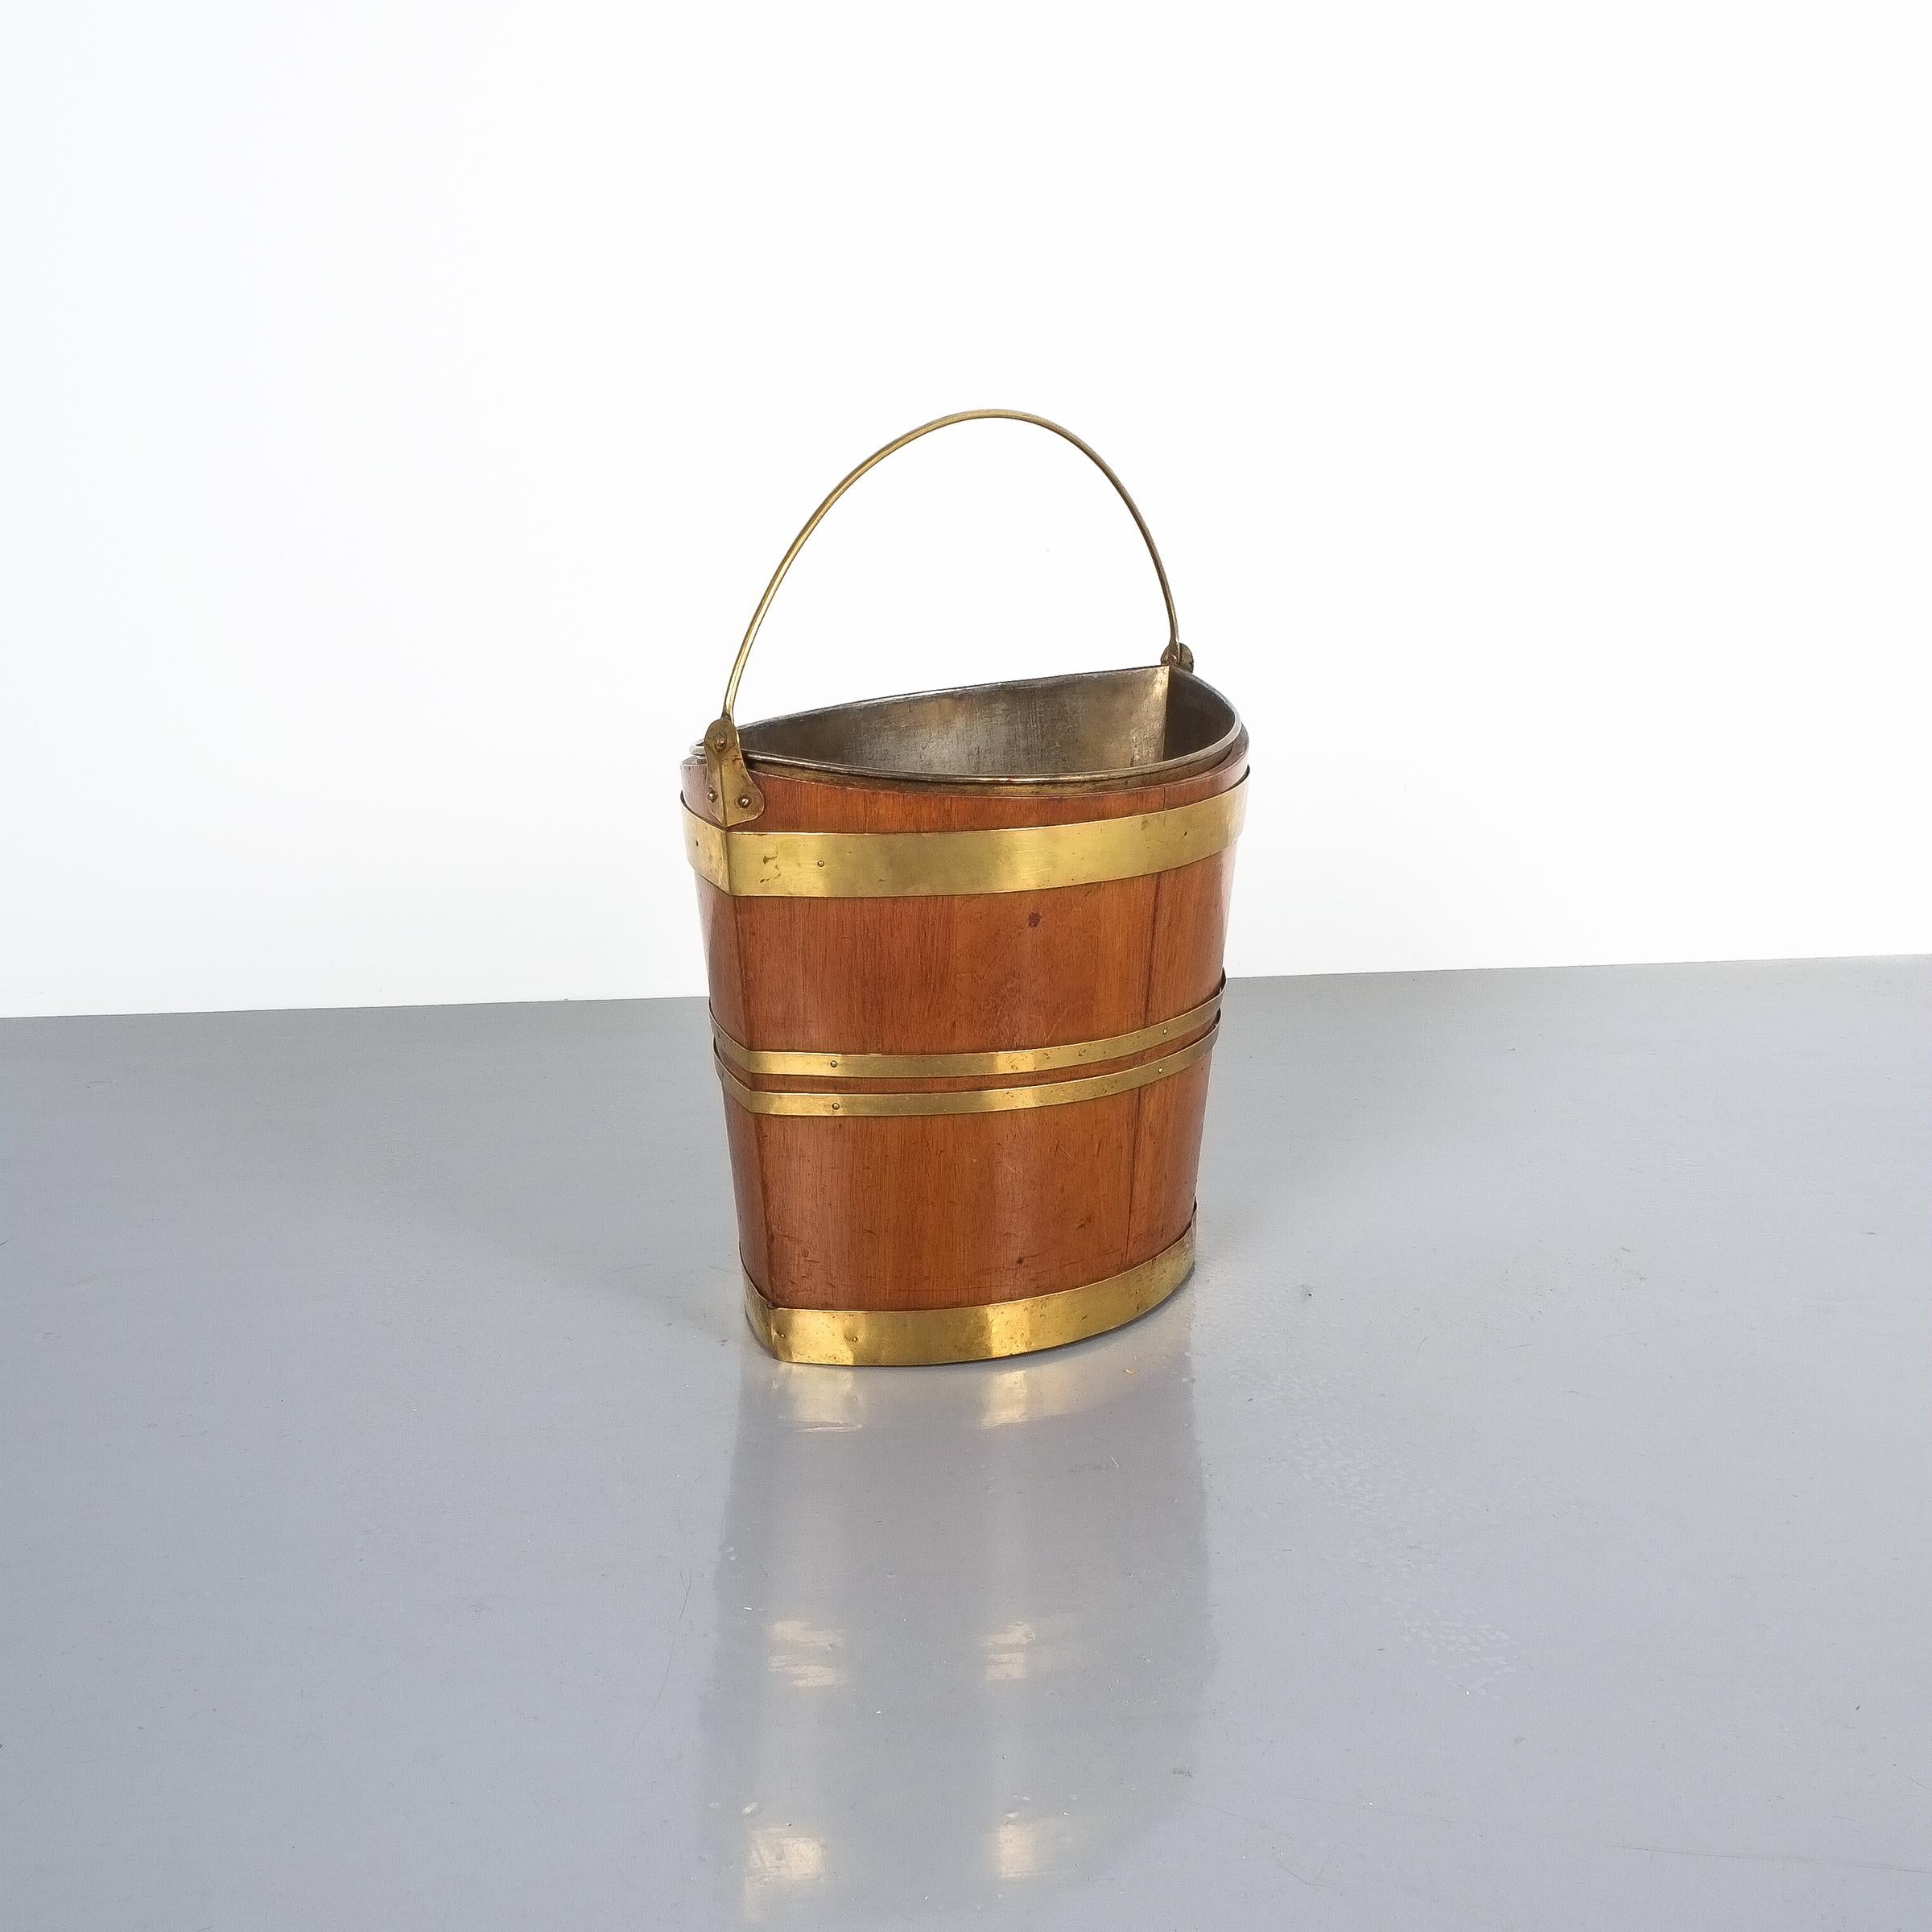 Irish 19th century oval oak brass peat bucket. Beautiful bucket that would make for an interesting waste paper bin or wine cooler or planter or the like. The brass insert is smaller than the wooden bucket.